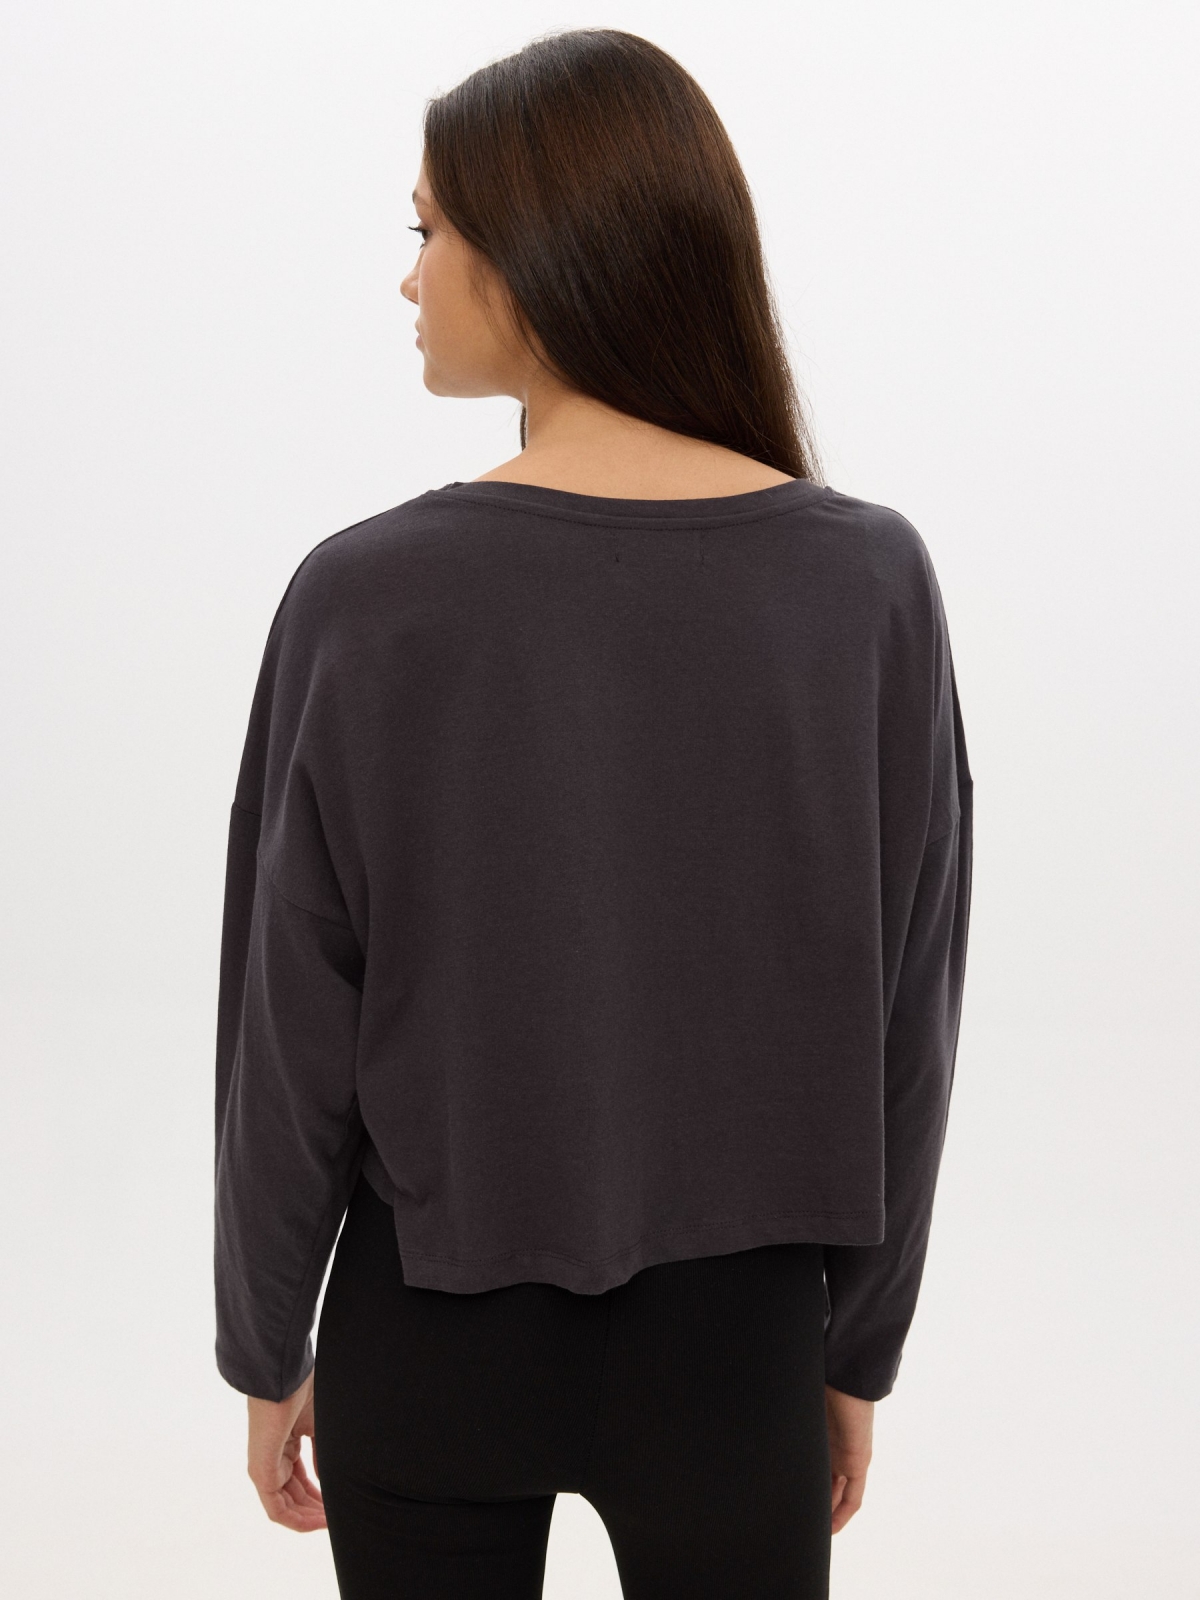 T-shirt with print dark grey middle back view